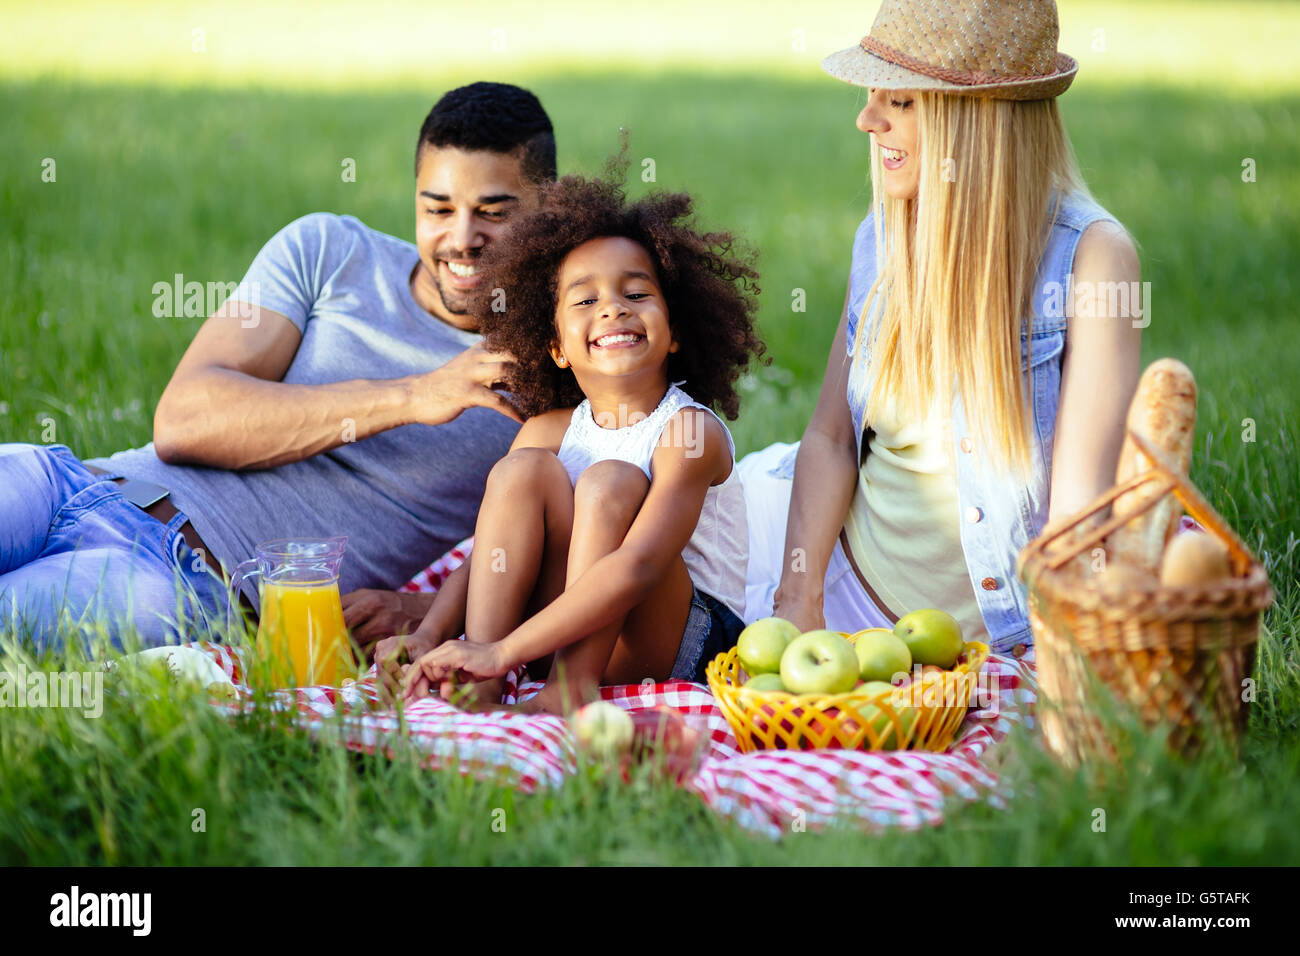 Family picnicking outdoors with their cute daughter Stock Photo